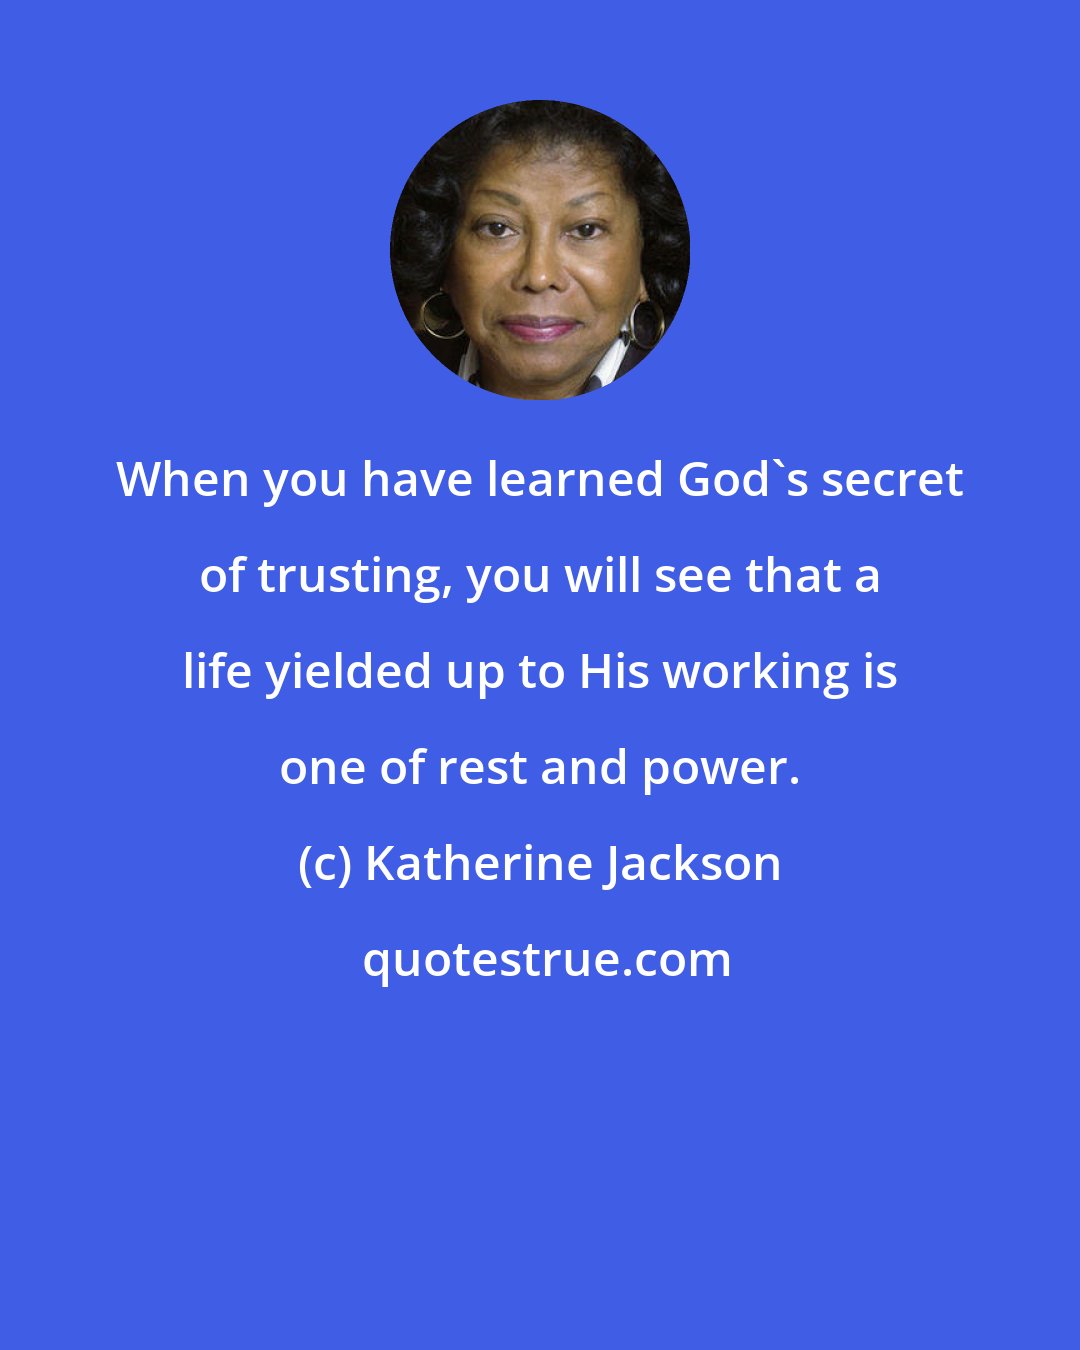 Katherine Jackson: When you have learned God's secret of trusting, you will see that a life yielded up to His working is one of rest and power.